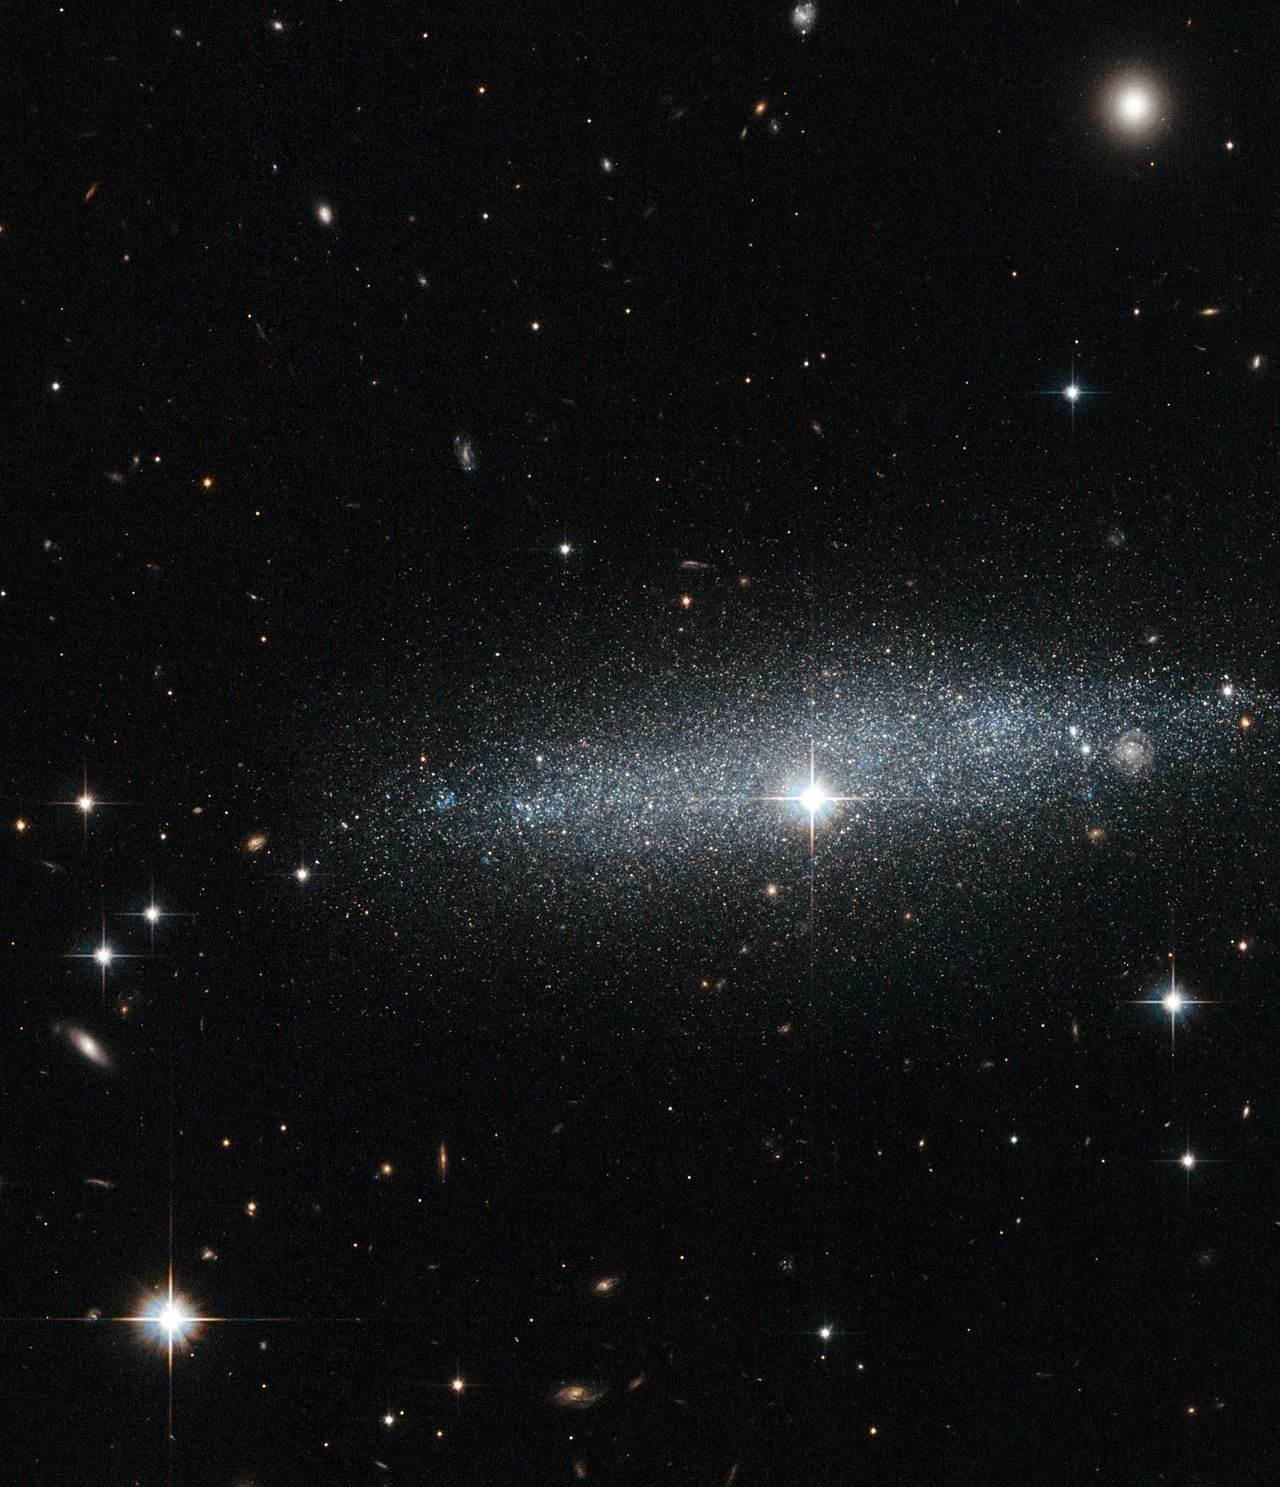 sparkly glittery galaxy is less diffuse than most